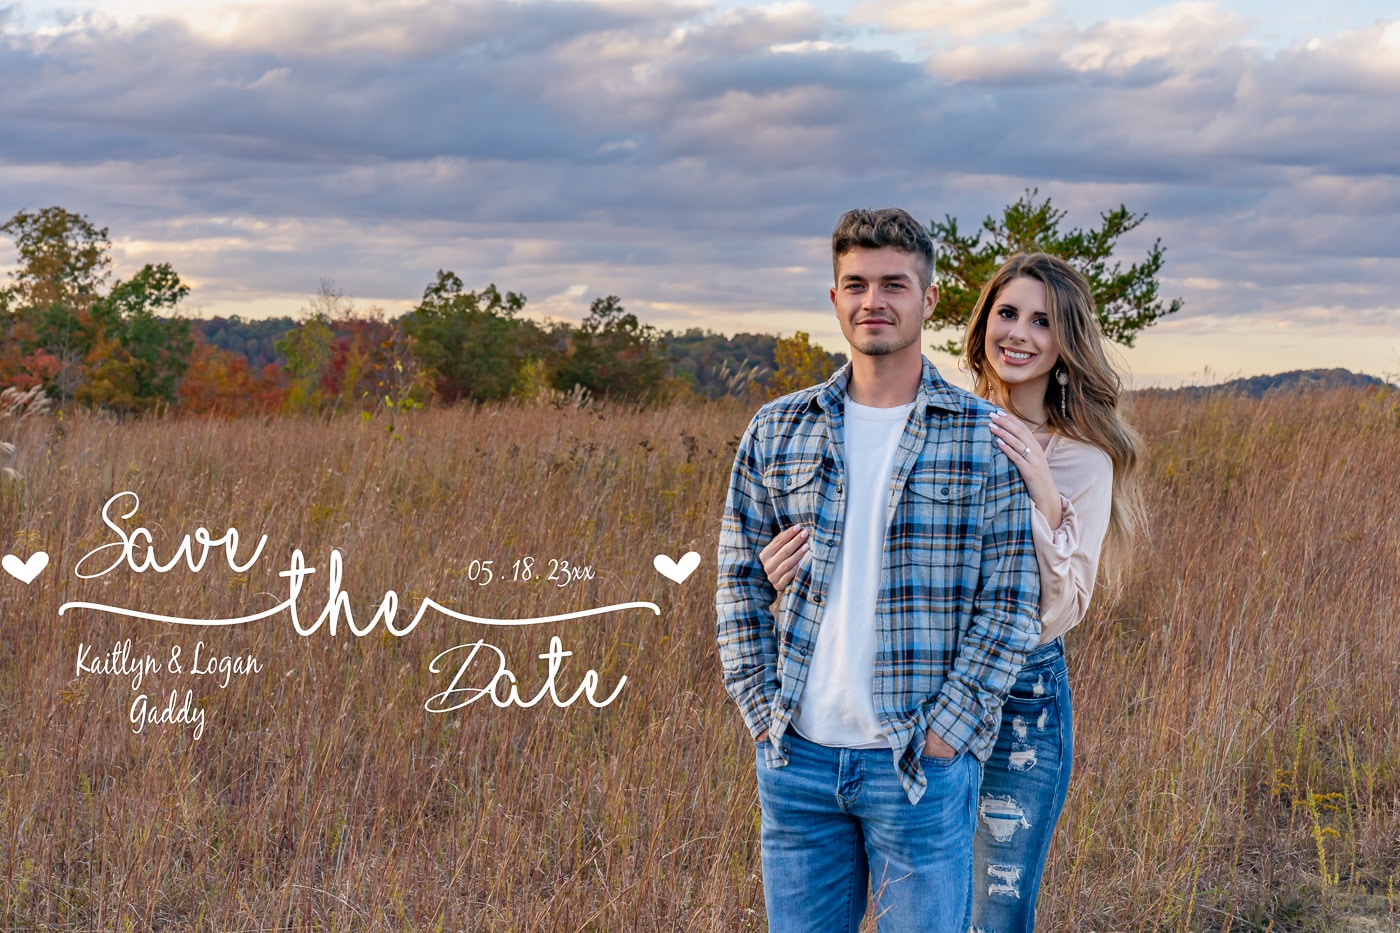 Logan and Kaitlyn's 'Save the Date' photo for their upcoming wedding in a Charleston field.